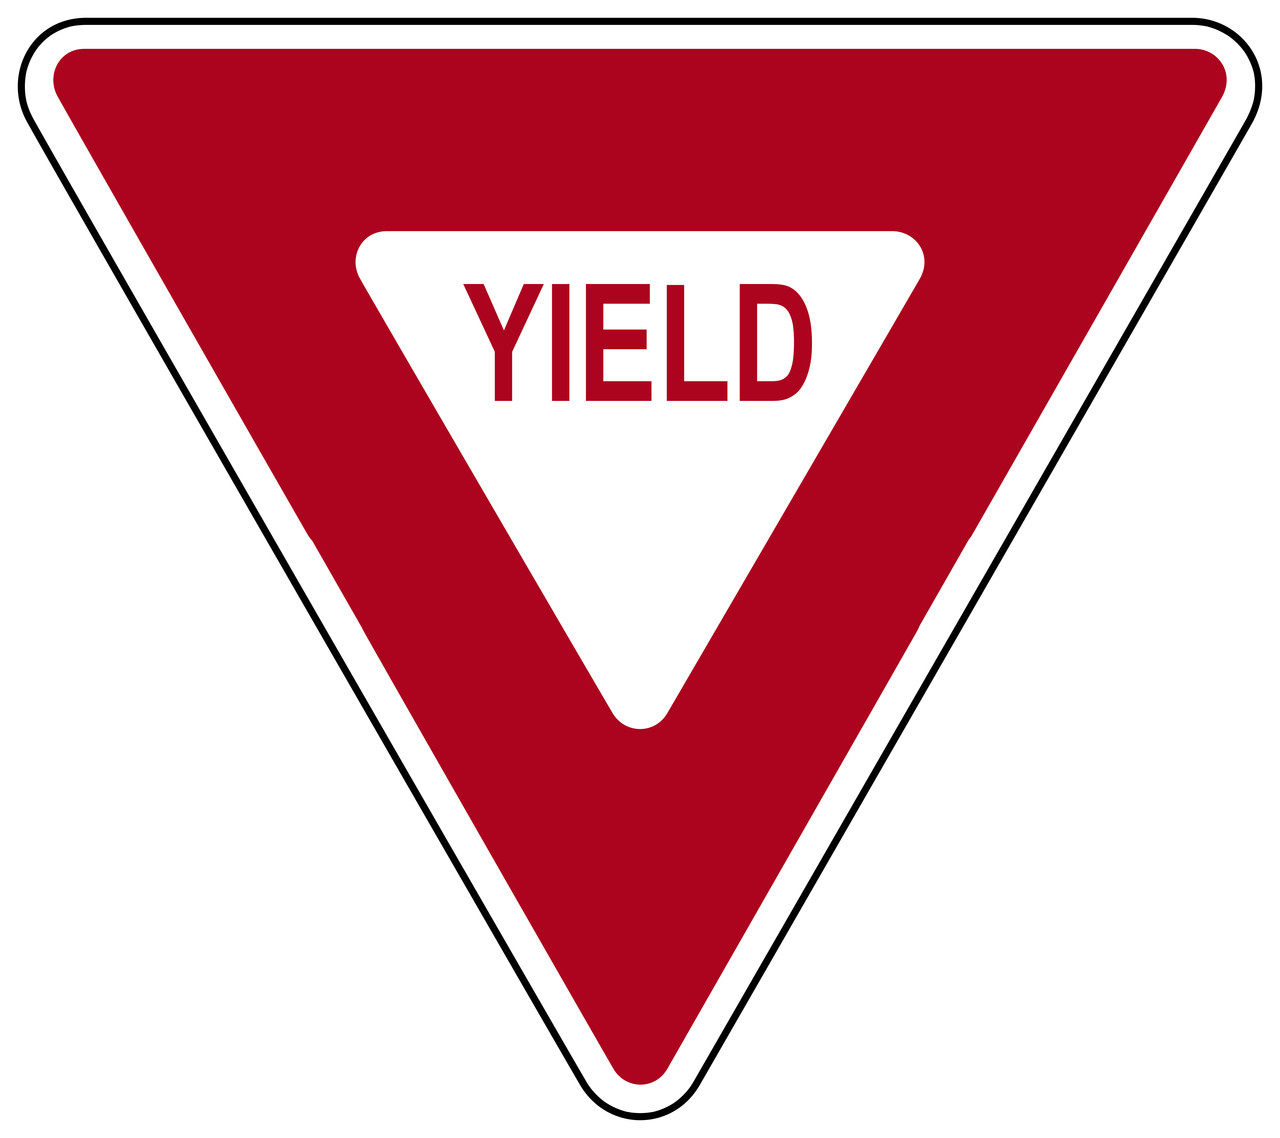 triangle-yield-sign-red-and-white-yield-sign